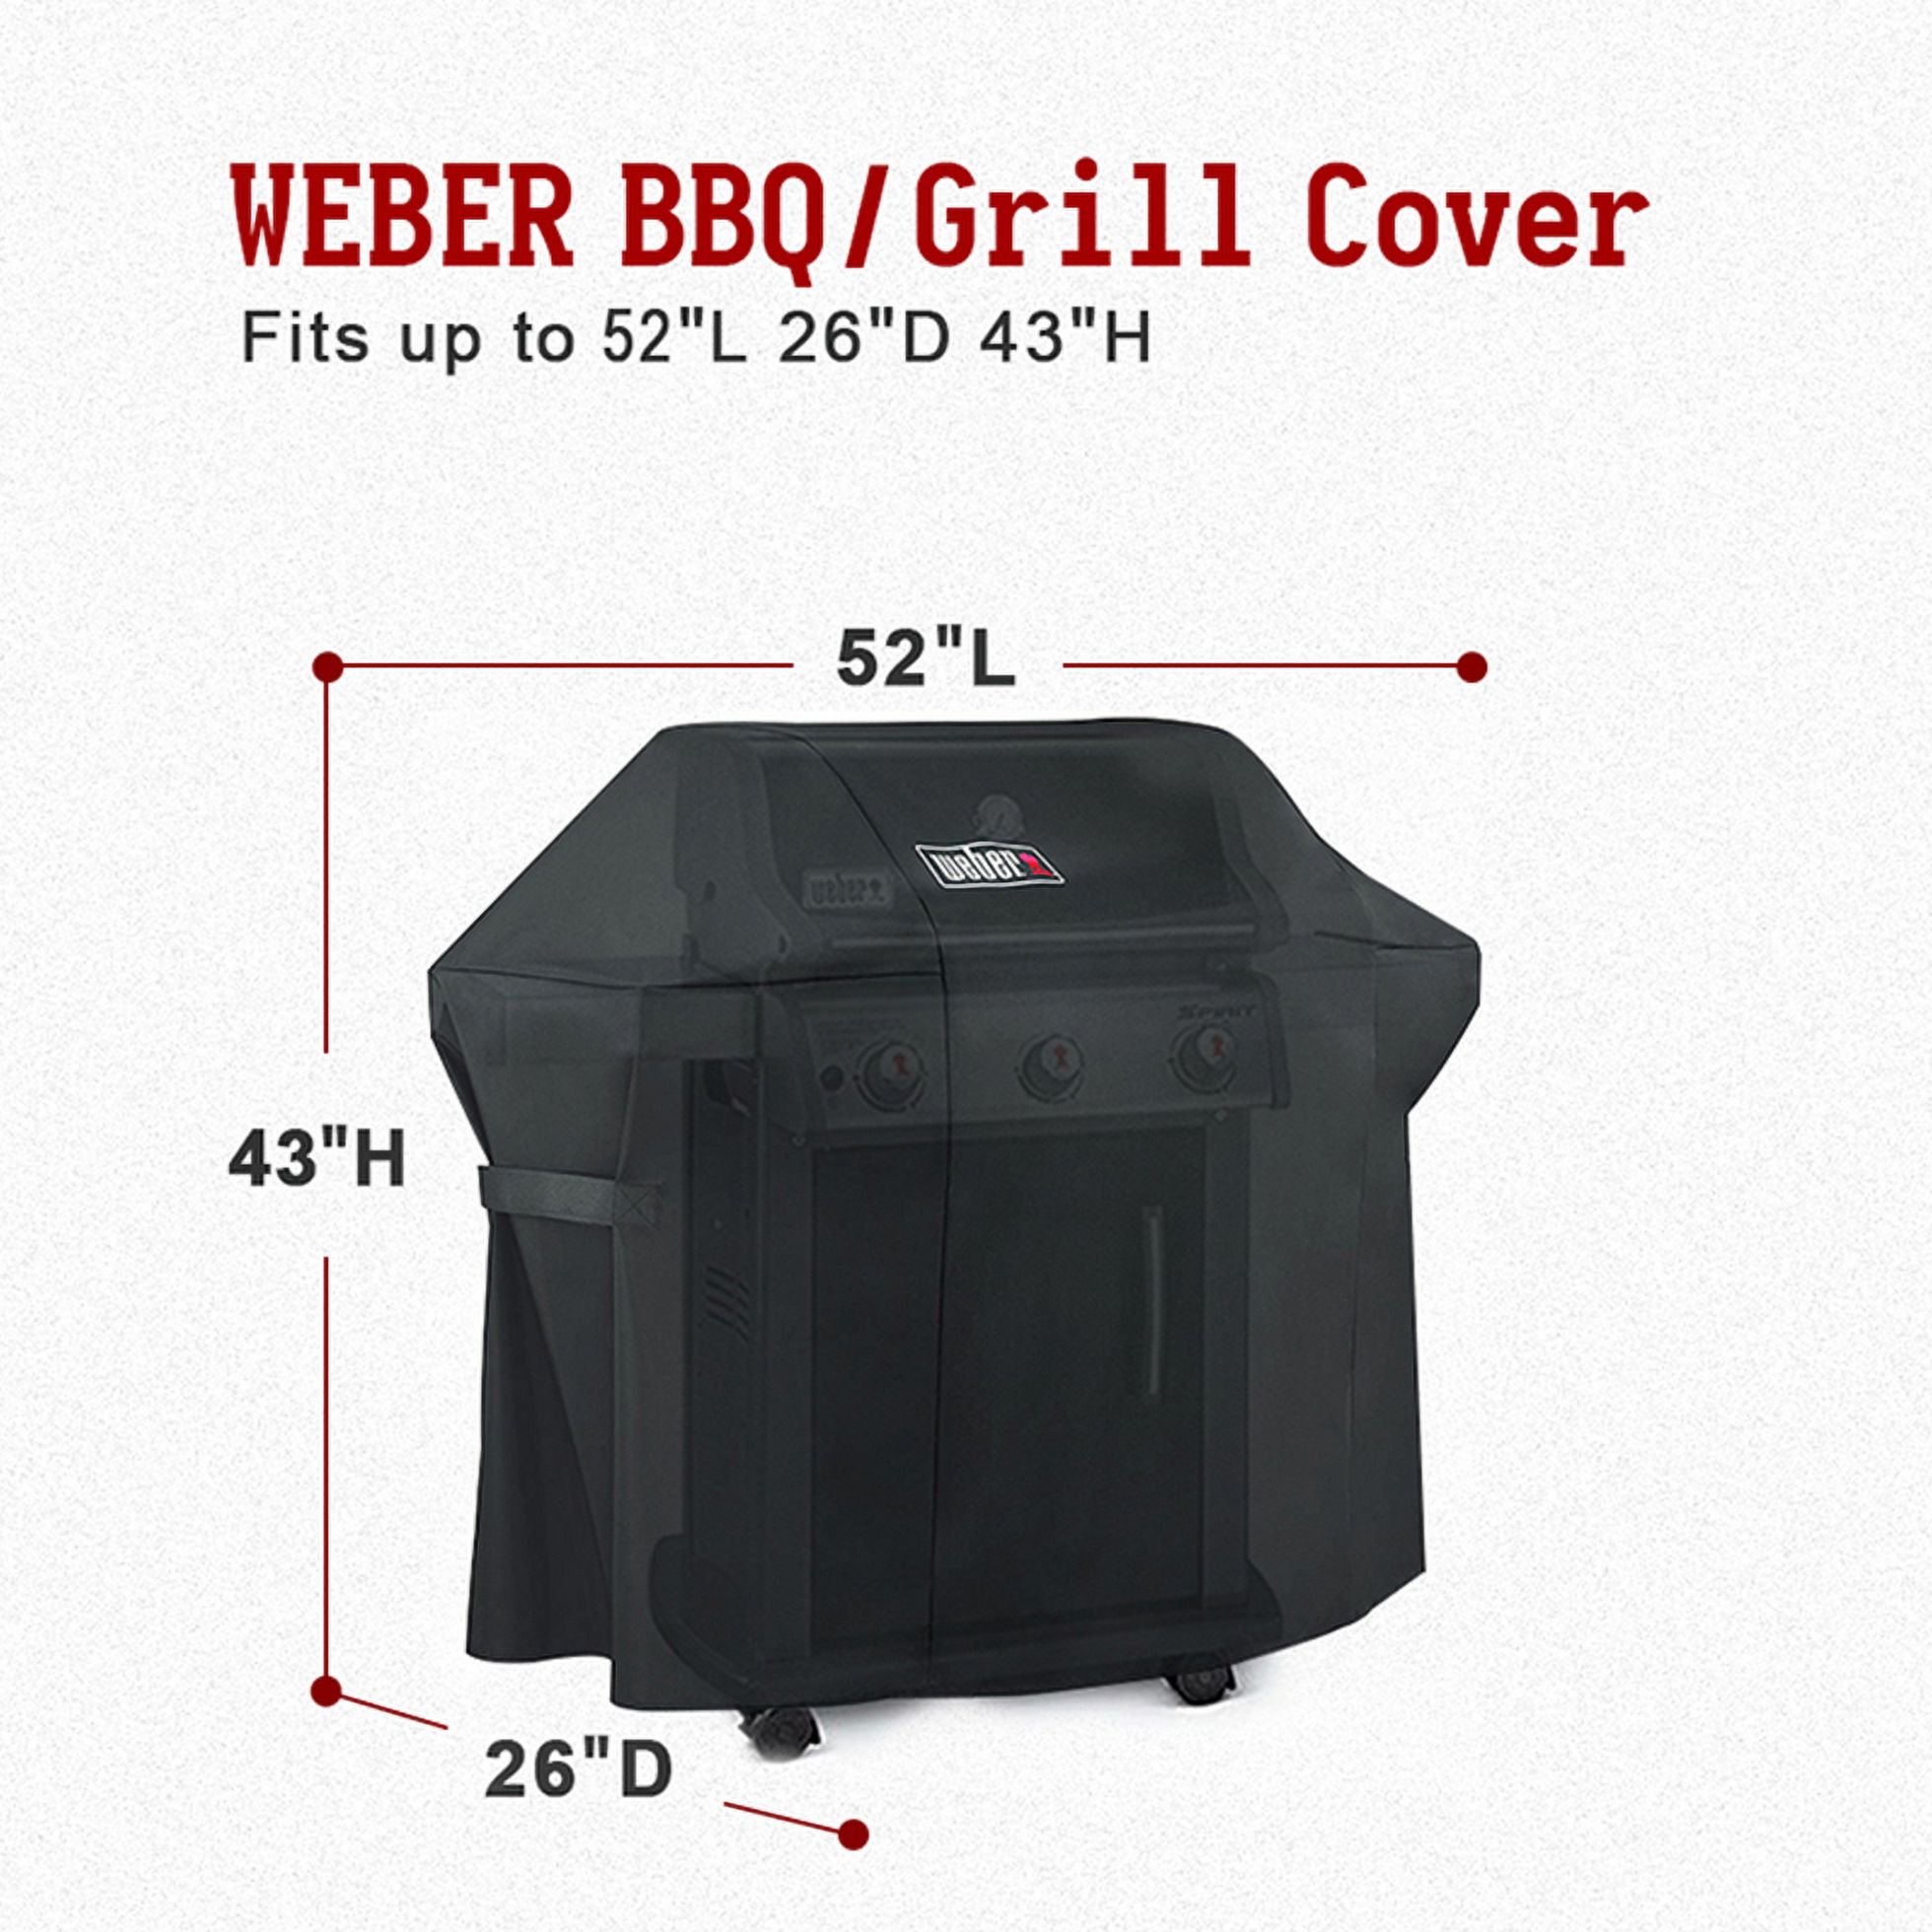 Weber 7106 Grill Cover for Weber Spirit 220 and 300 Series Gas Grills (52 x 26 x 43 inches)Black - image 4 of 7